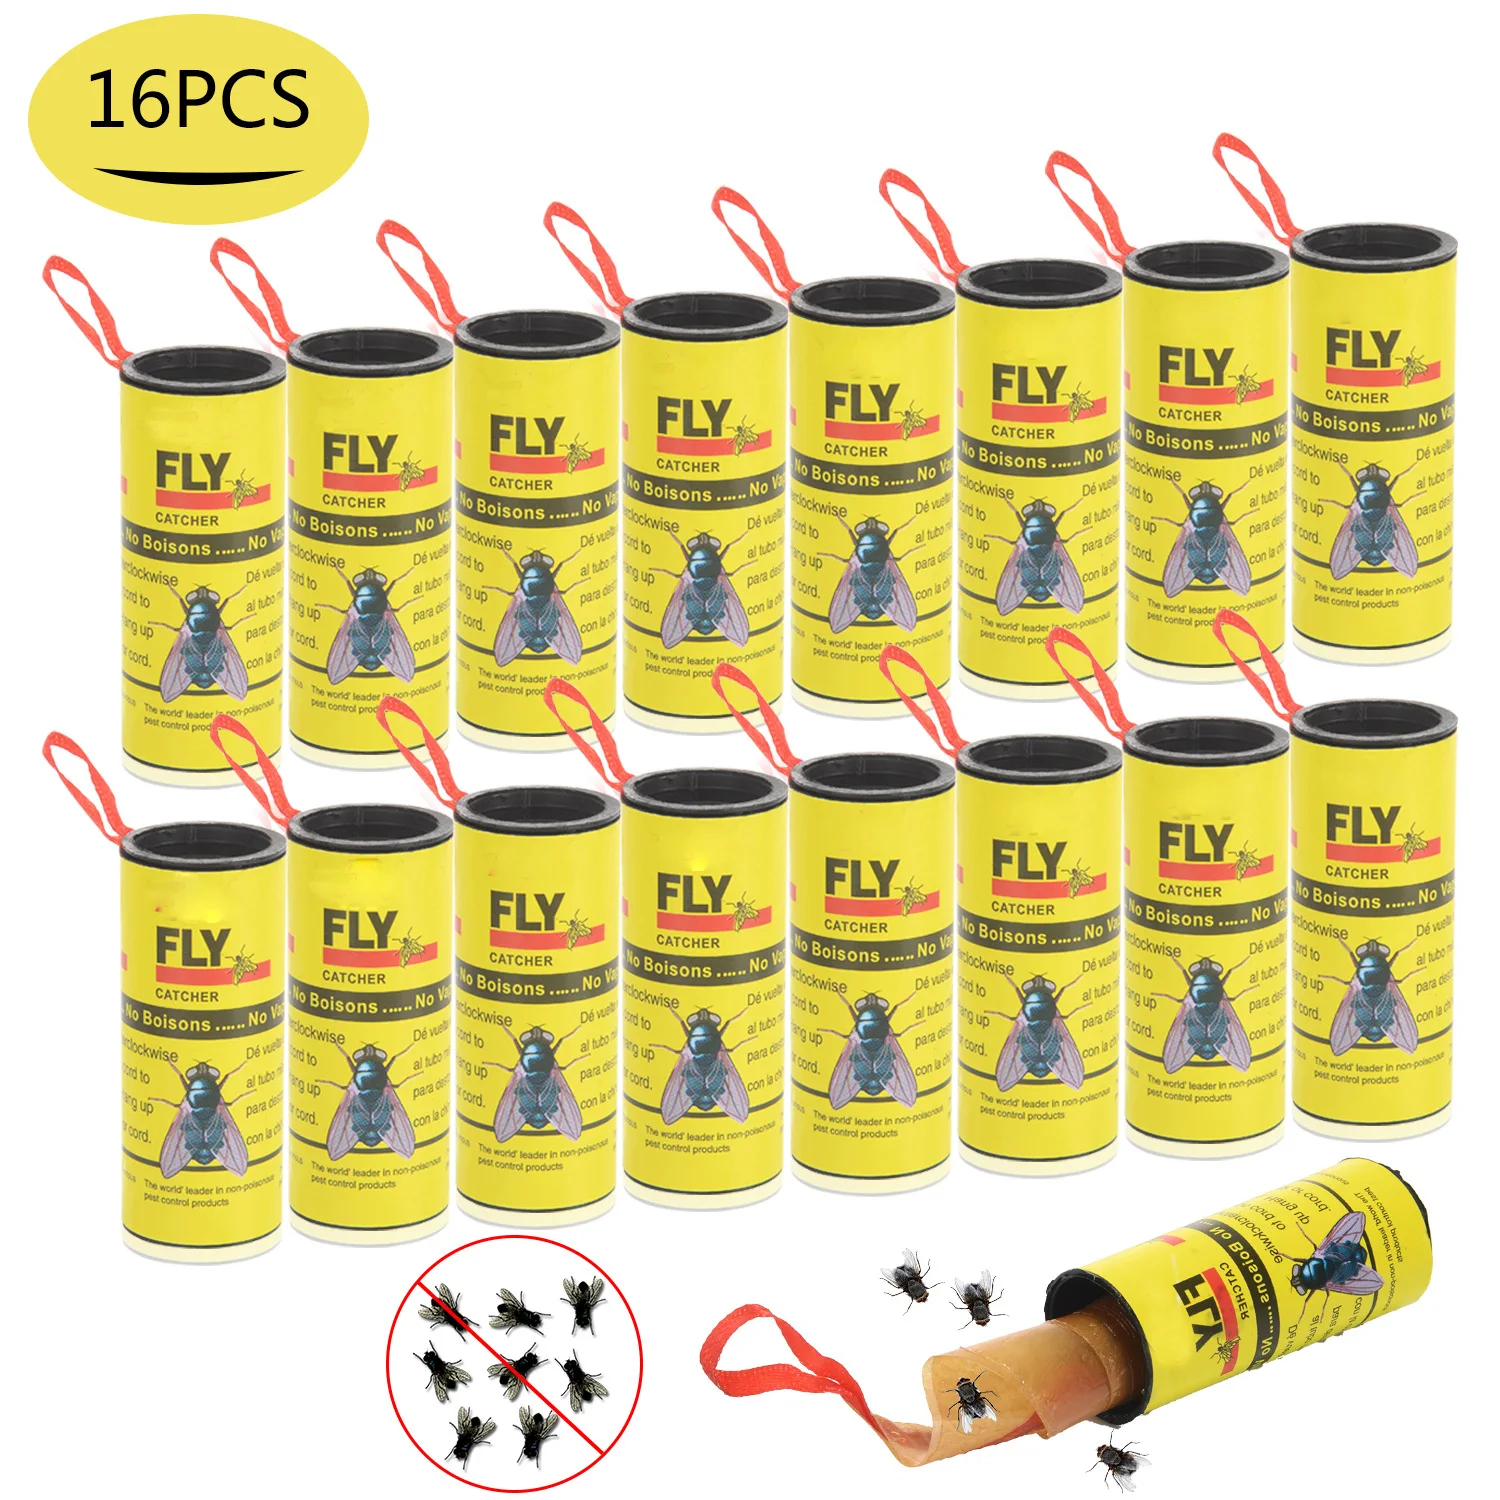 16PCS Sticky Fly Ribbons Roll Strong Glue Double Sided Flies Paper